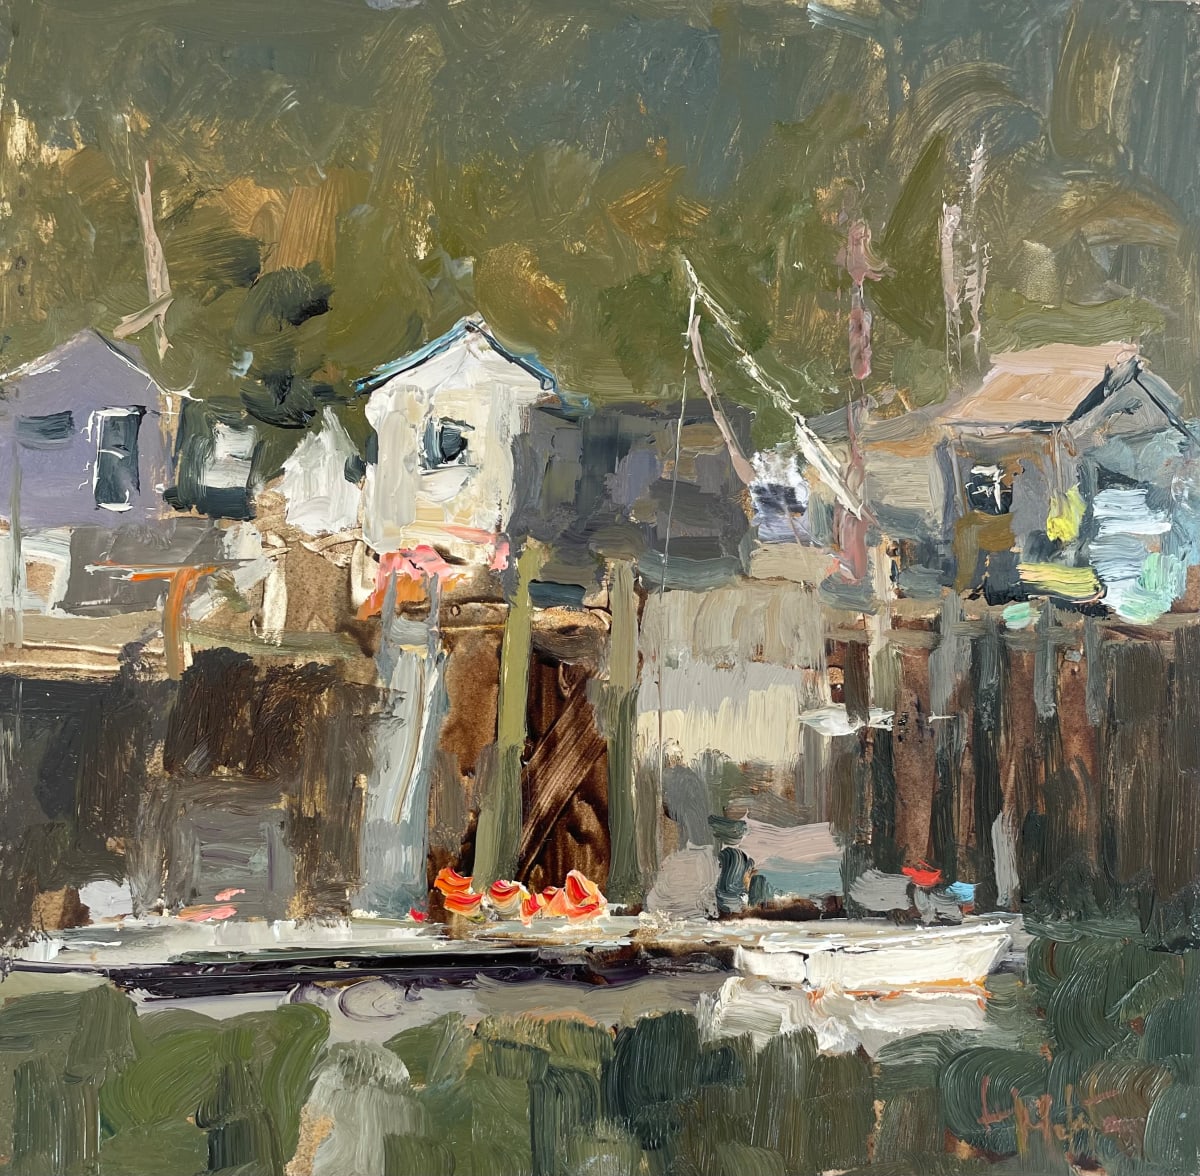 Harbor at Low Tide by Lynn Mehta  Image: Harbor at Low Tide,  8" x 8"